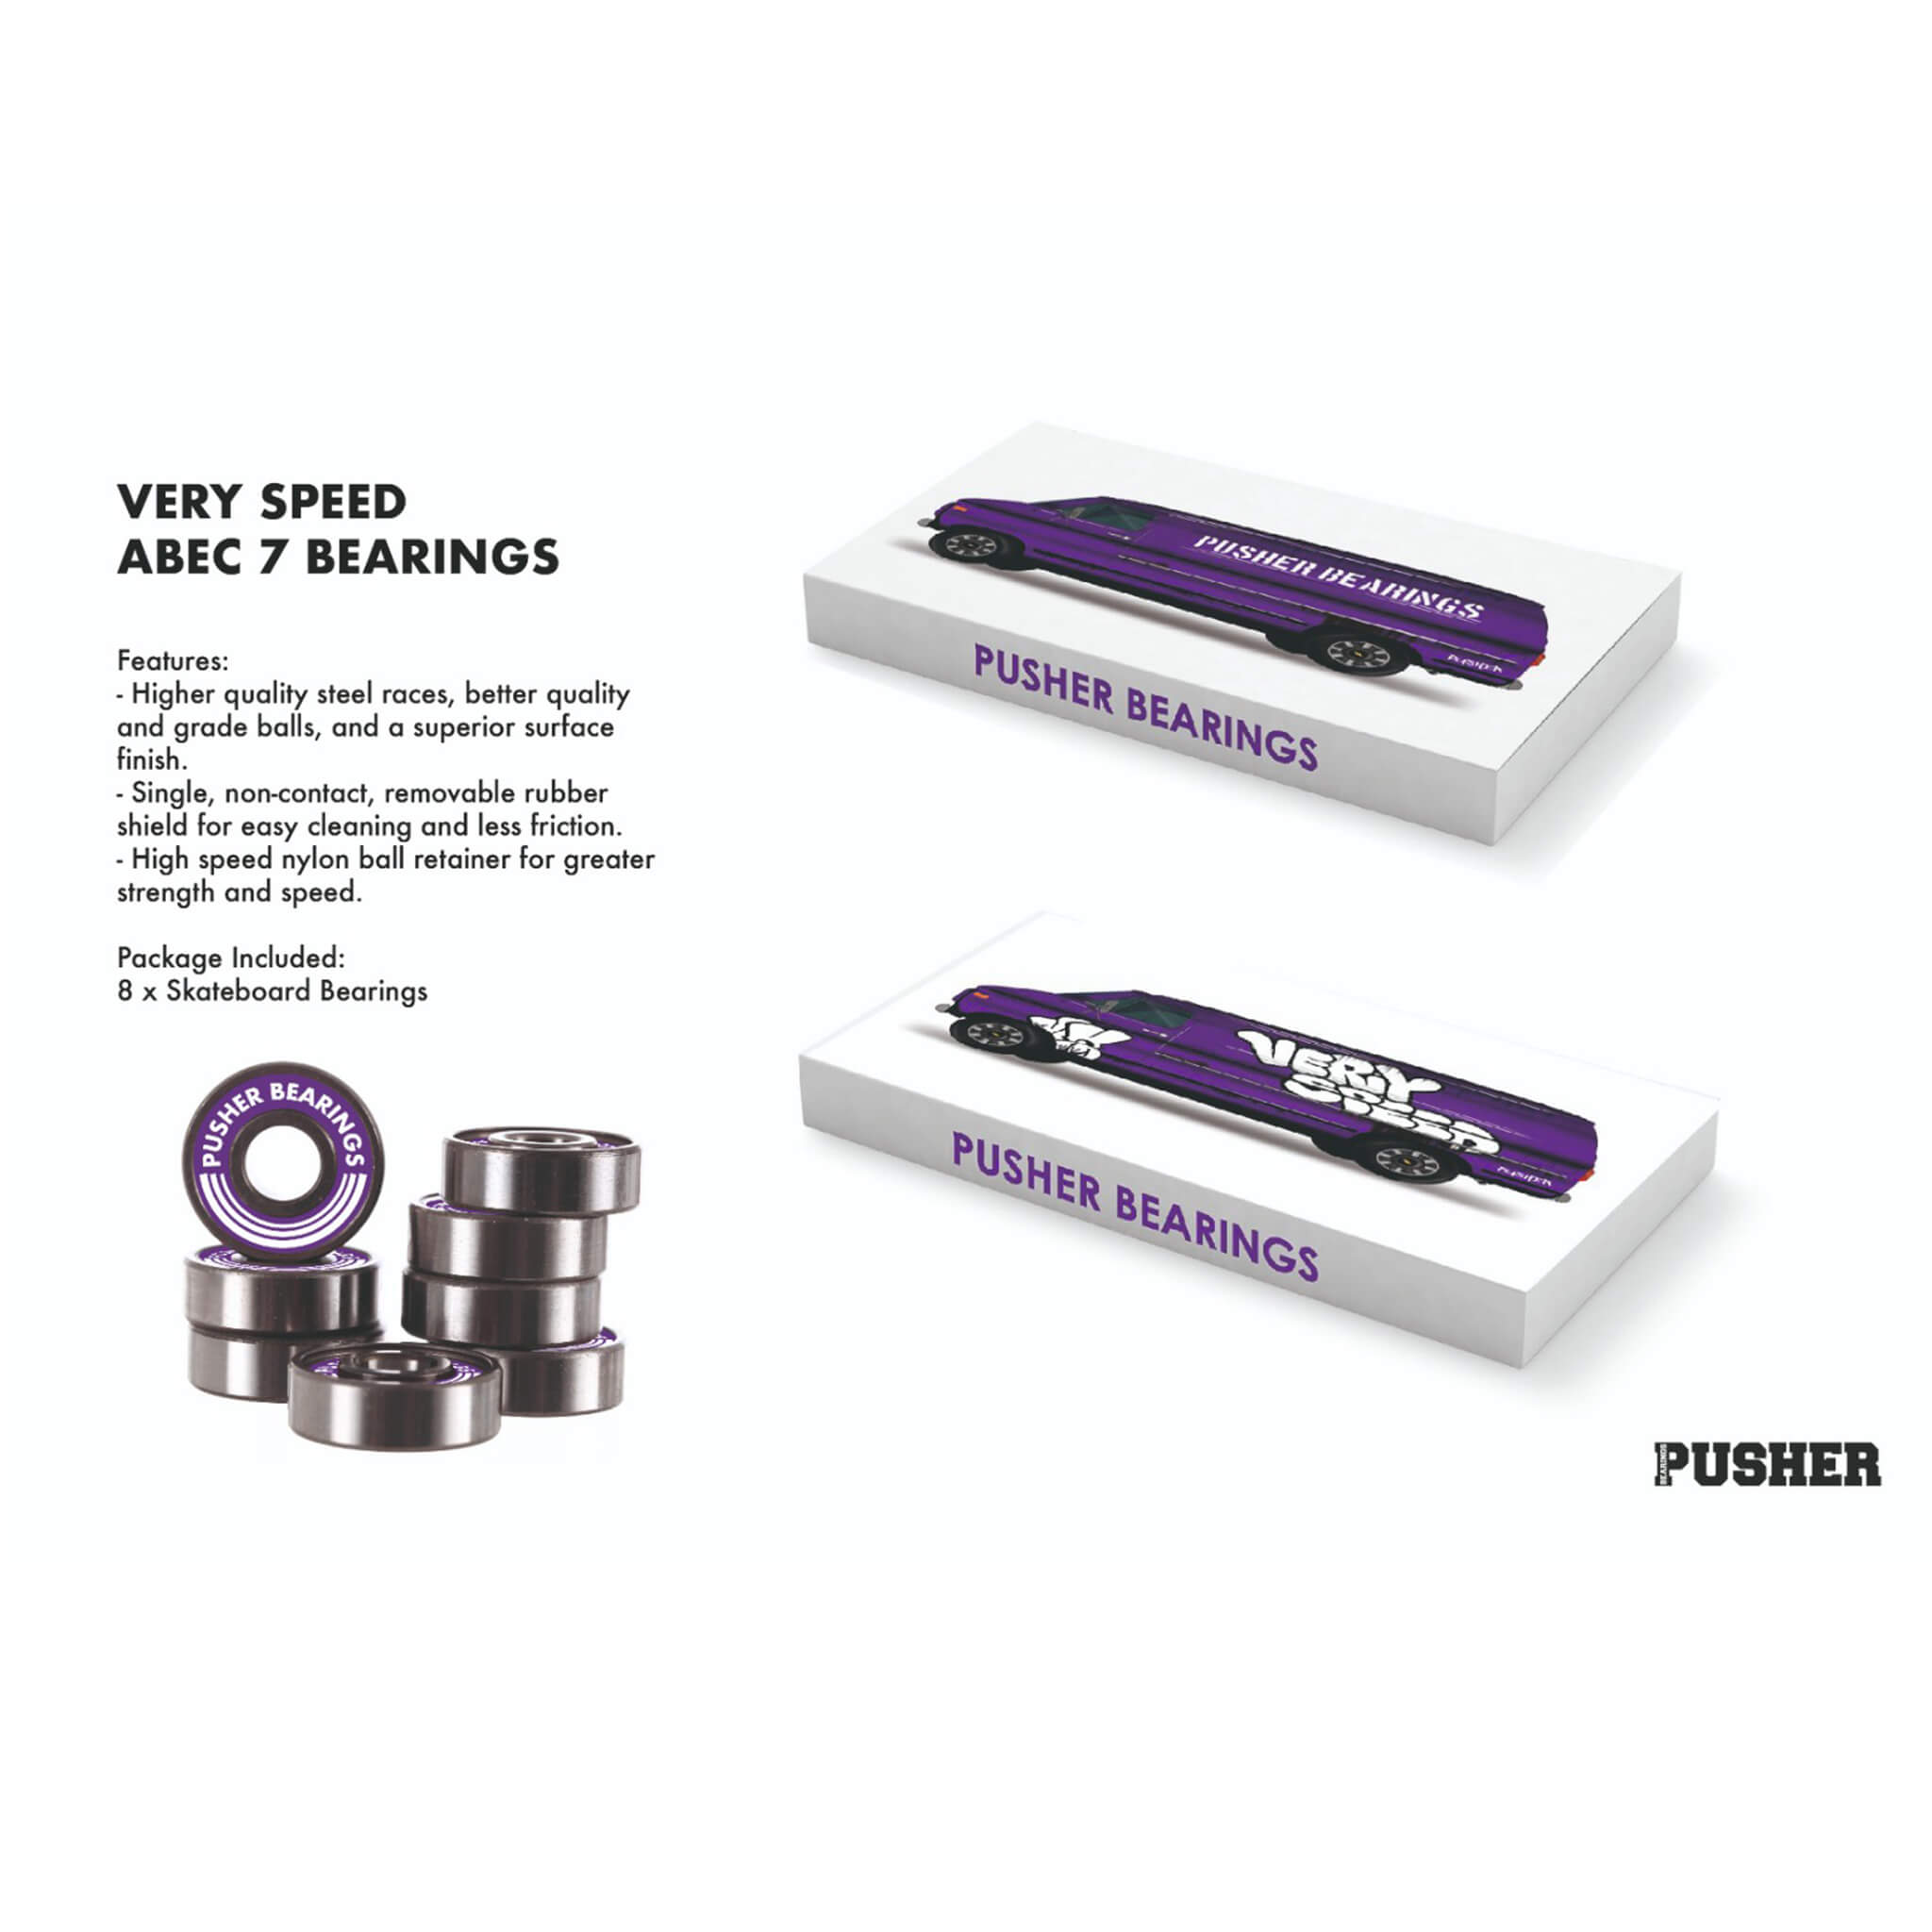 Picker skateboard bearings for smooth rides